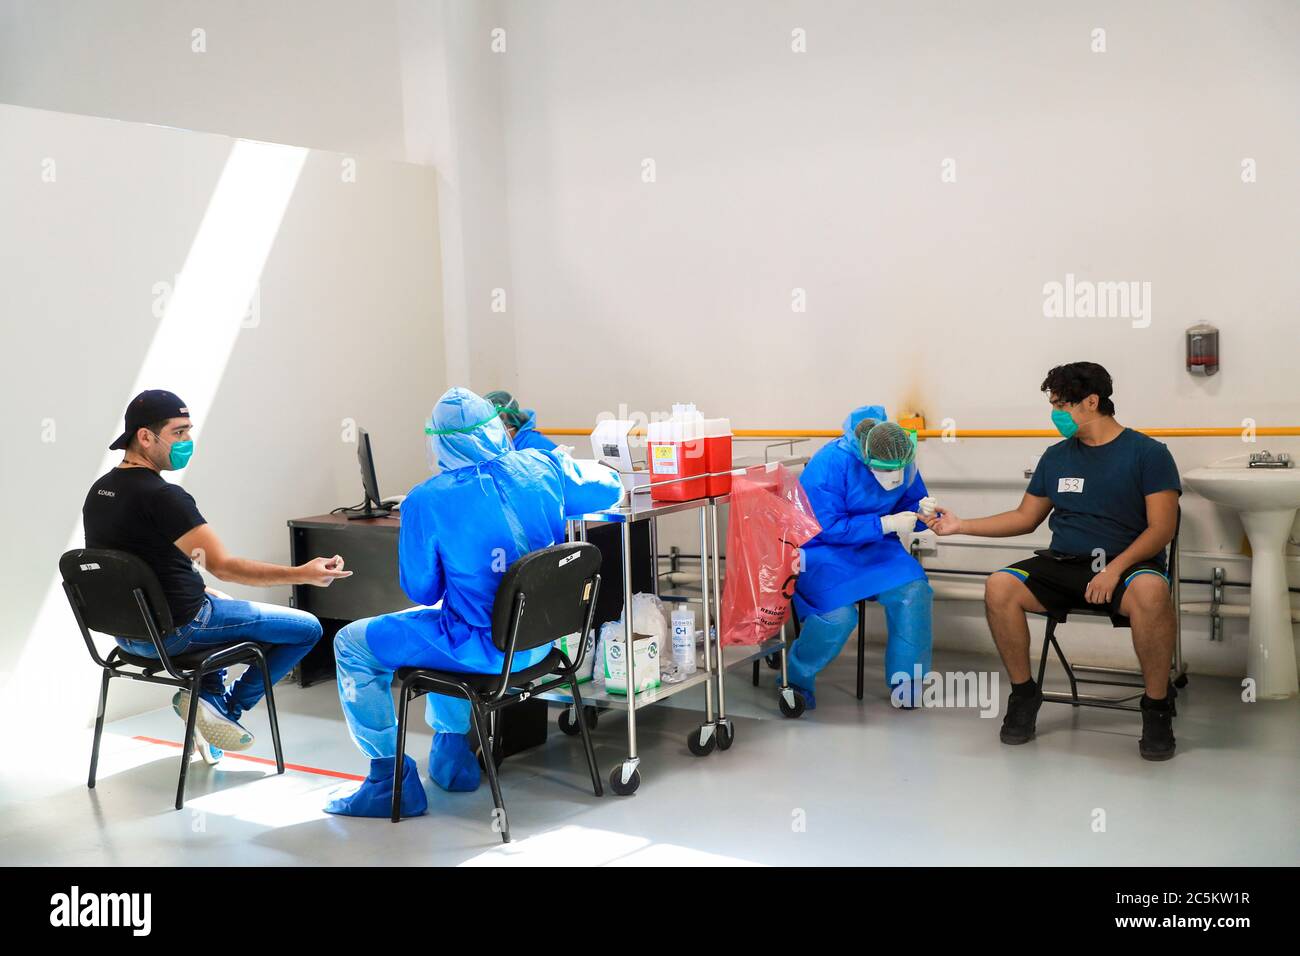 HERMOSILLO, MEXICO - JULY 3: Medical and health personnel carry out rapid tests and follow-up on people who present symptoms of covid-19 in the facilities of the Arena Sonora, which has led to the red alert due to the increase in cases in the state of Sonora on July 3, 2020 in Hermosillo, Mexico. (Luis Gutierrez / Norte Photo /)   HERMOSILLO, MEXICO - JULY 3: Medical and health personnel carry out rapid tests and follow-up on people who present symptoms of covid-19 in the facilities of the Arena Sonora, which has led to the red alert due to the increase in cases in the state of Sonora on July Stock Photo